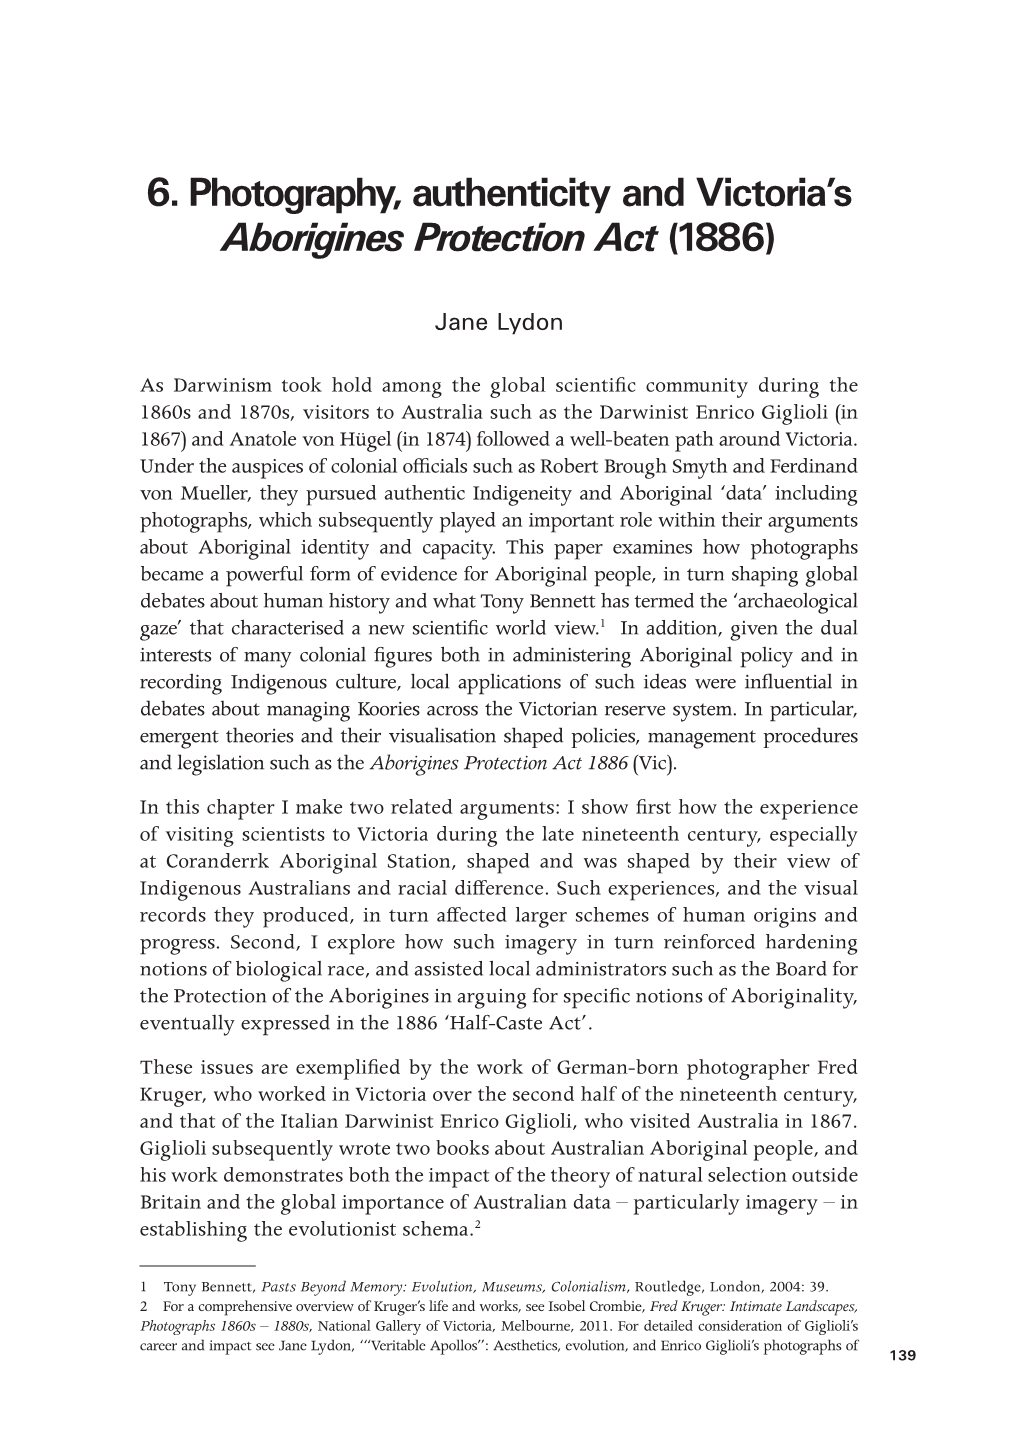 6. Photography, Authenticity and Victoria's Aborigines Protection Act